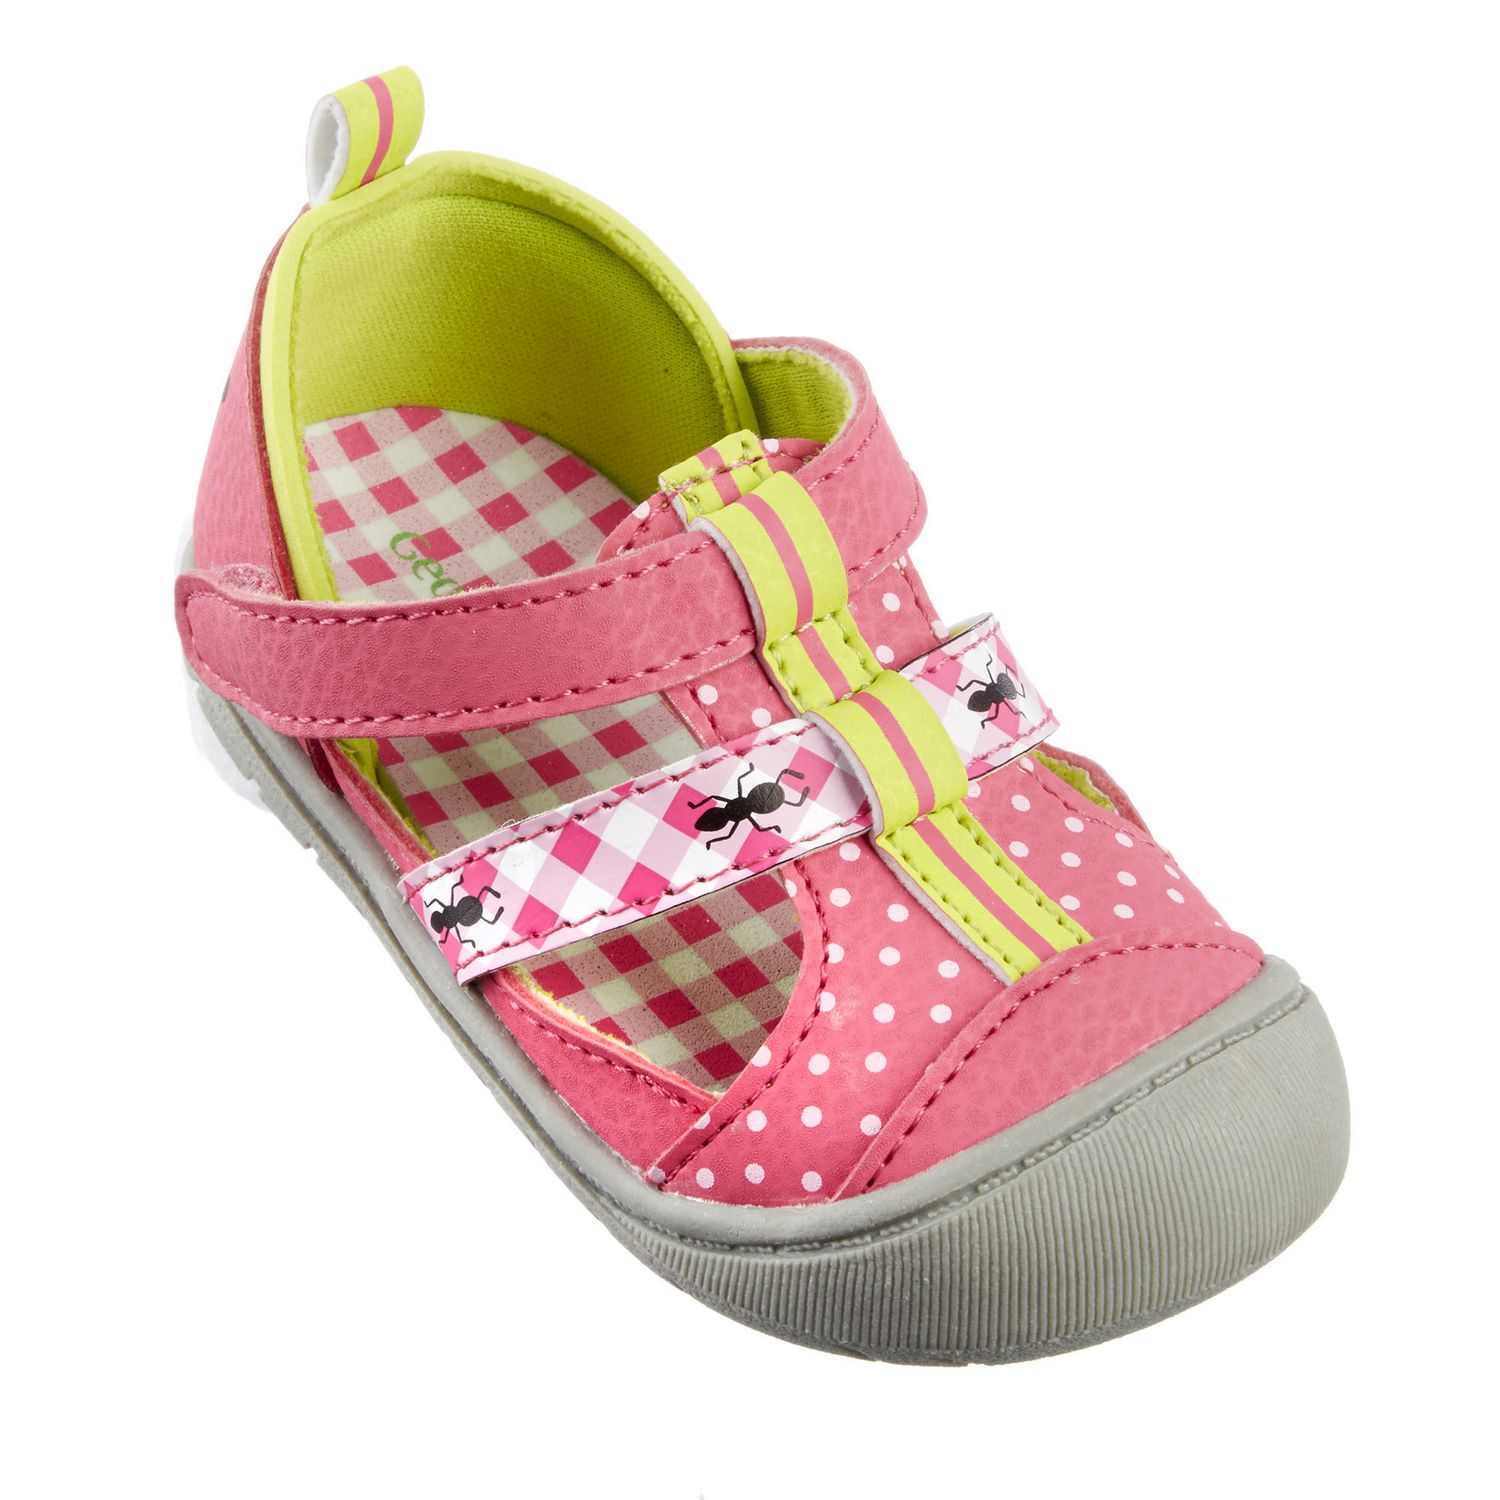 George baby Girls' Casual Shoes | Walmart Canada